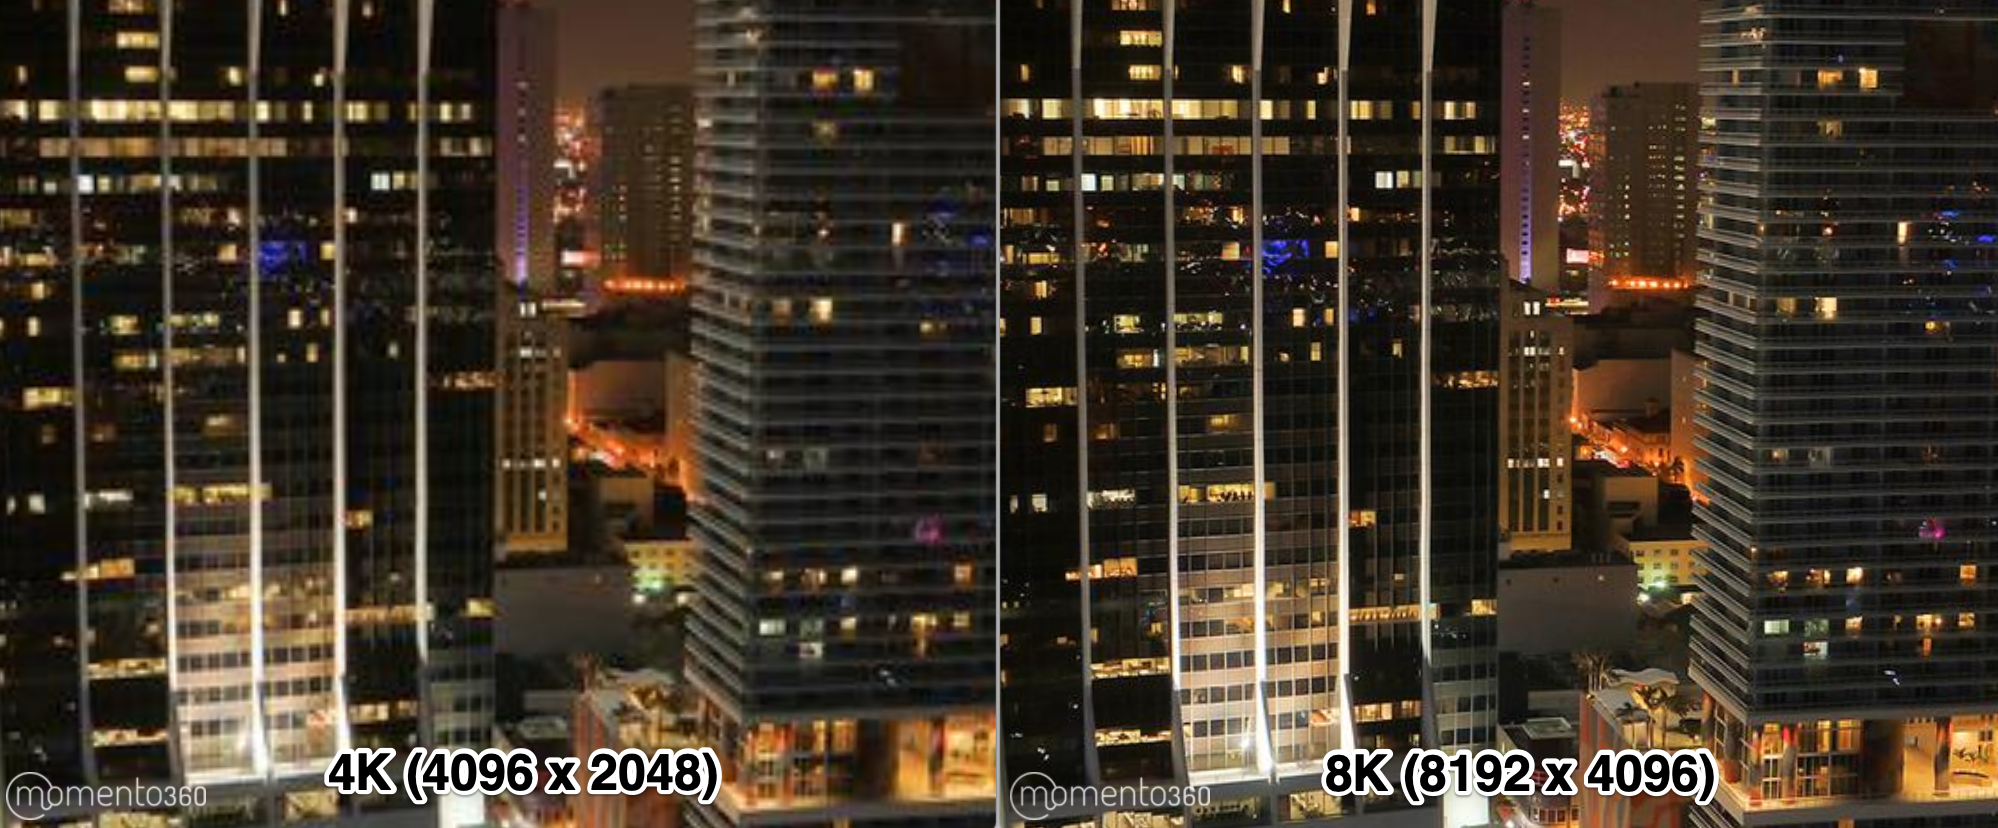 8K Resolution Now Available